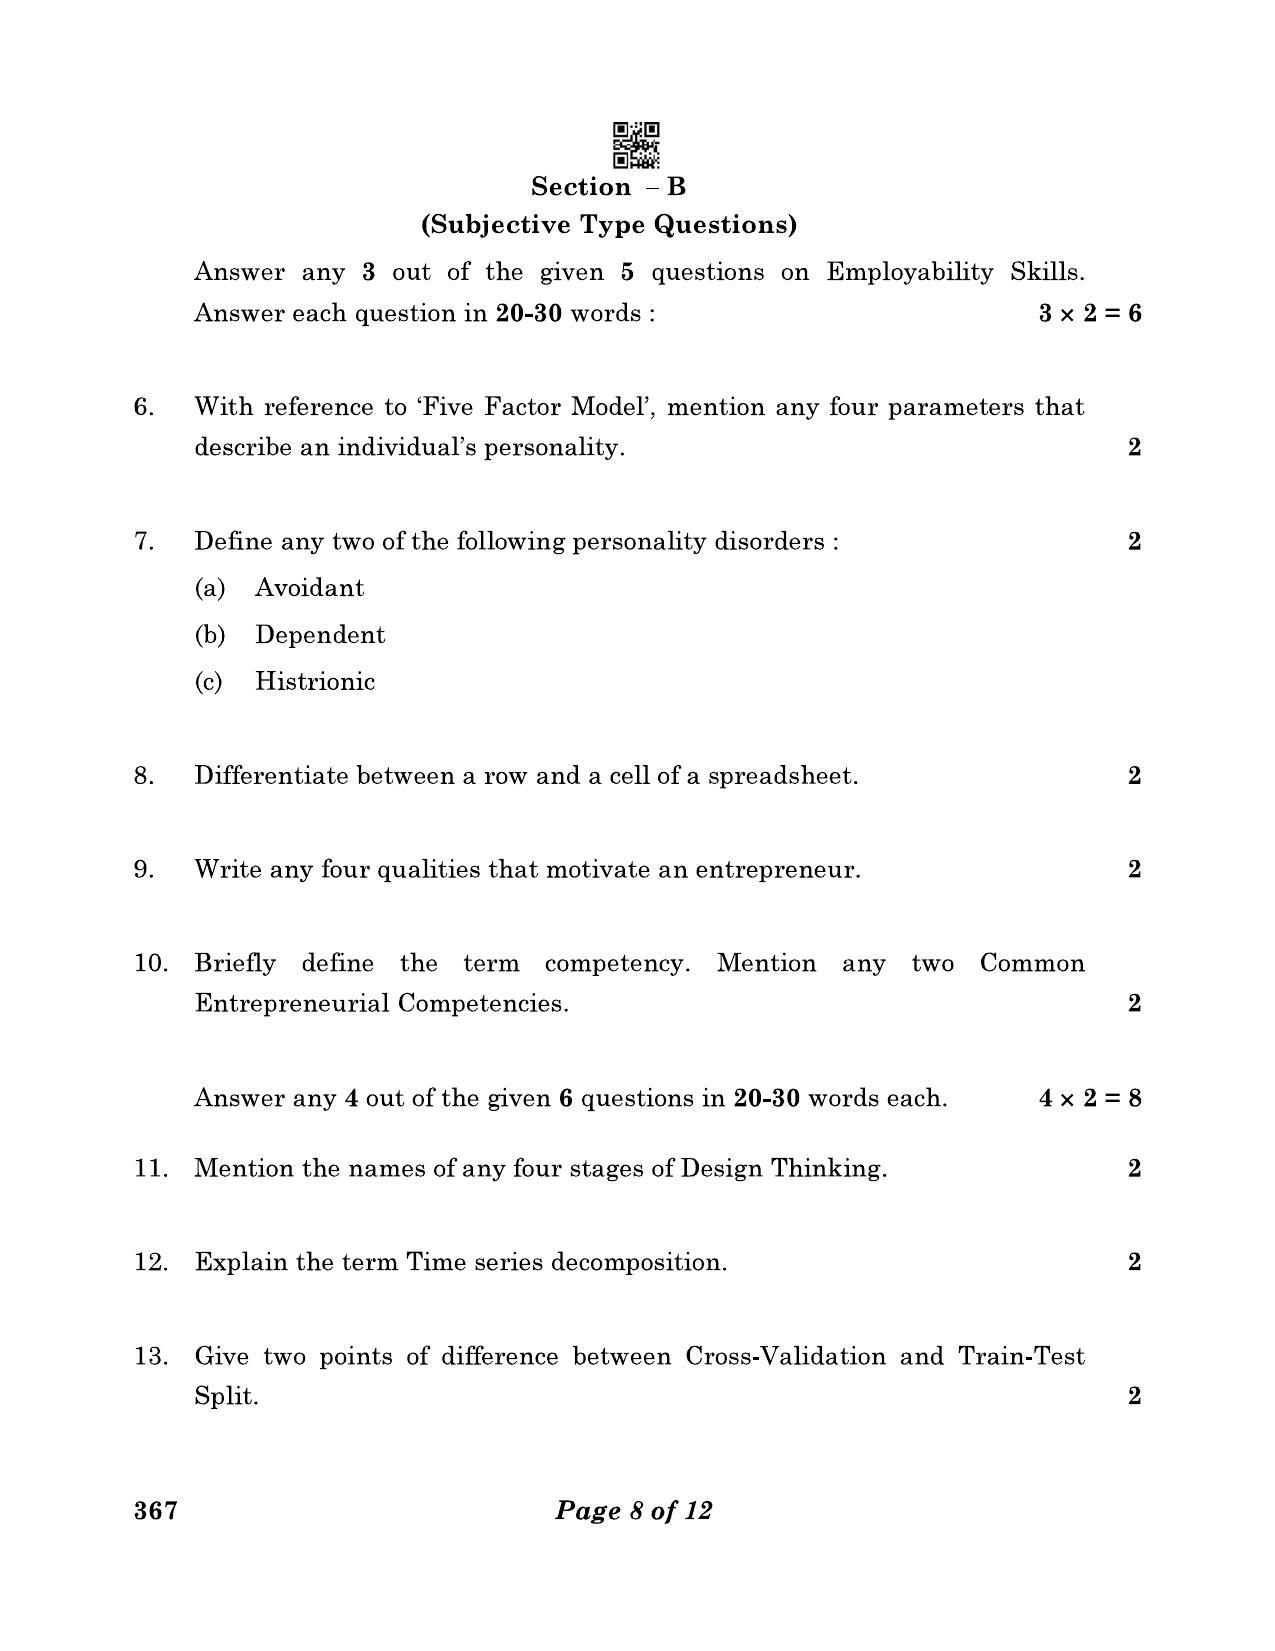 CBSE Class 12 367_Artificial Intelligence 2023 Question Paper - Page 8